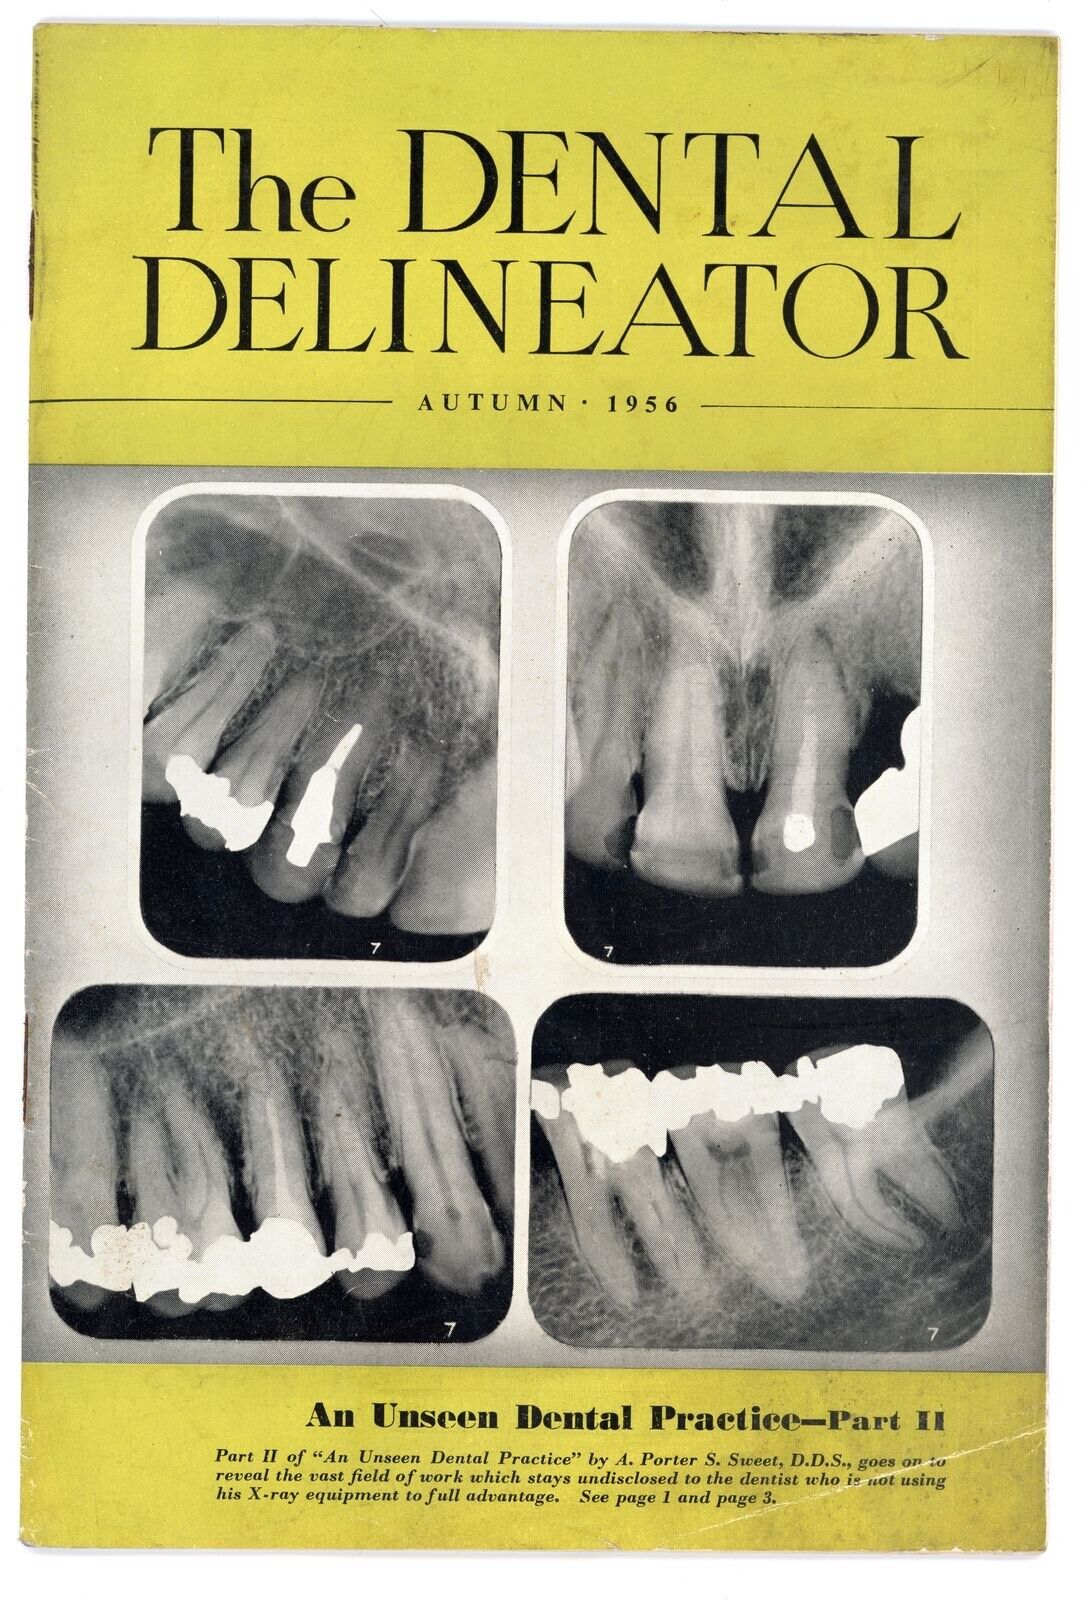 Vintage Dentistry magazine The Dental Delineator Autumn 1956 great print ads #4